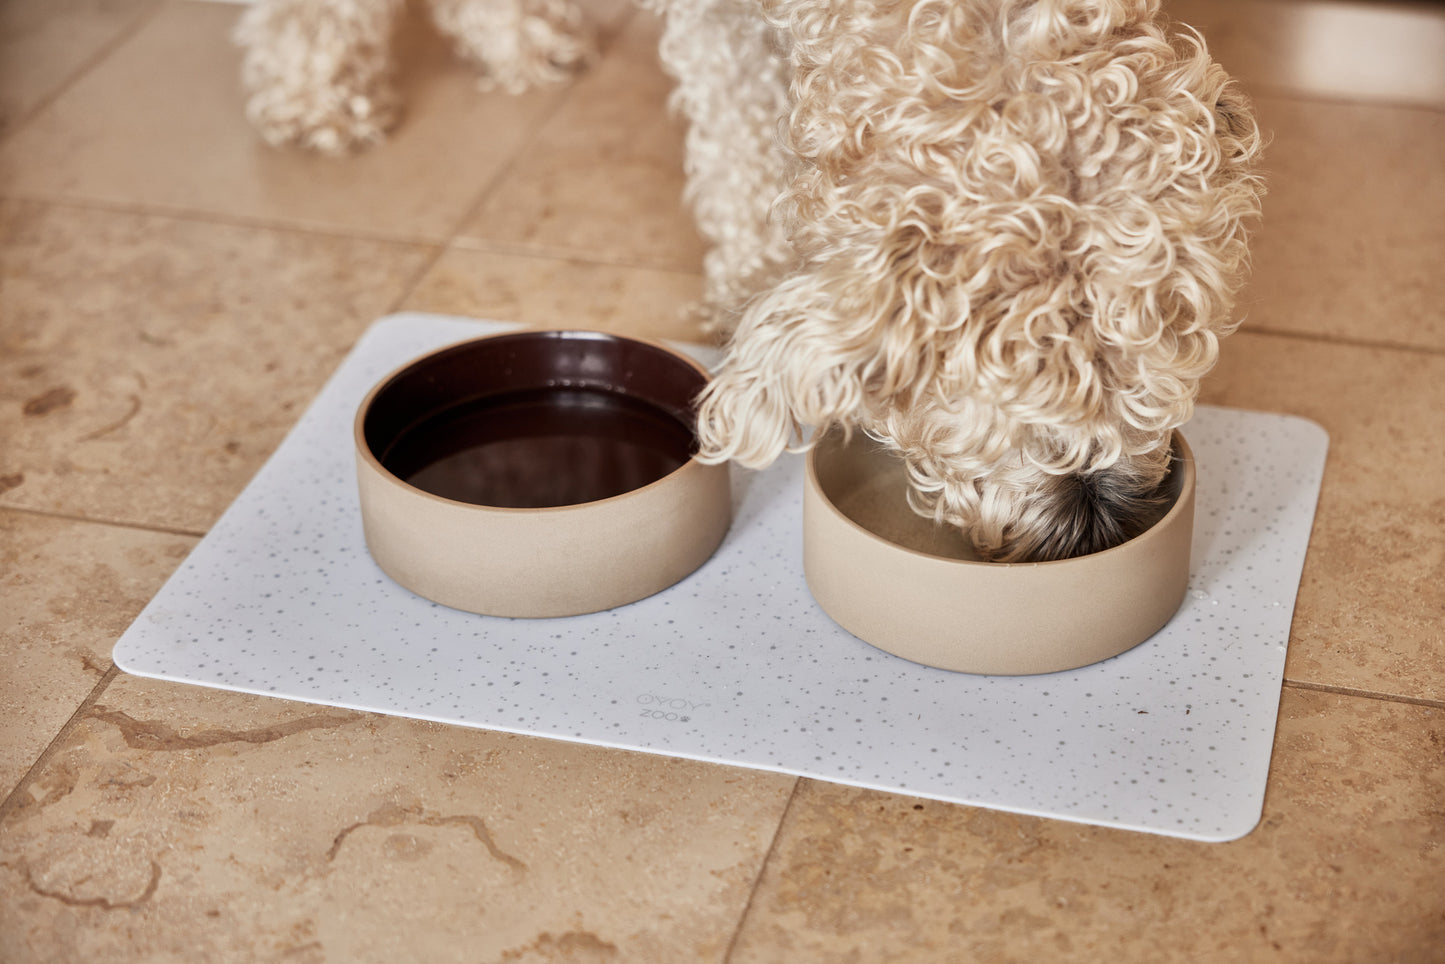 Load image into Gallery viewer, Sia Dog Bowl - Small
